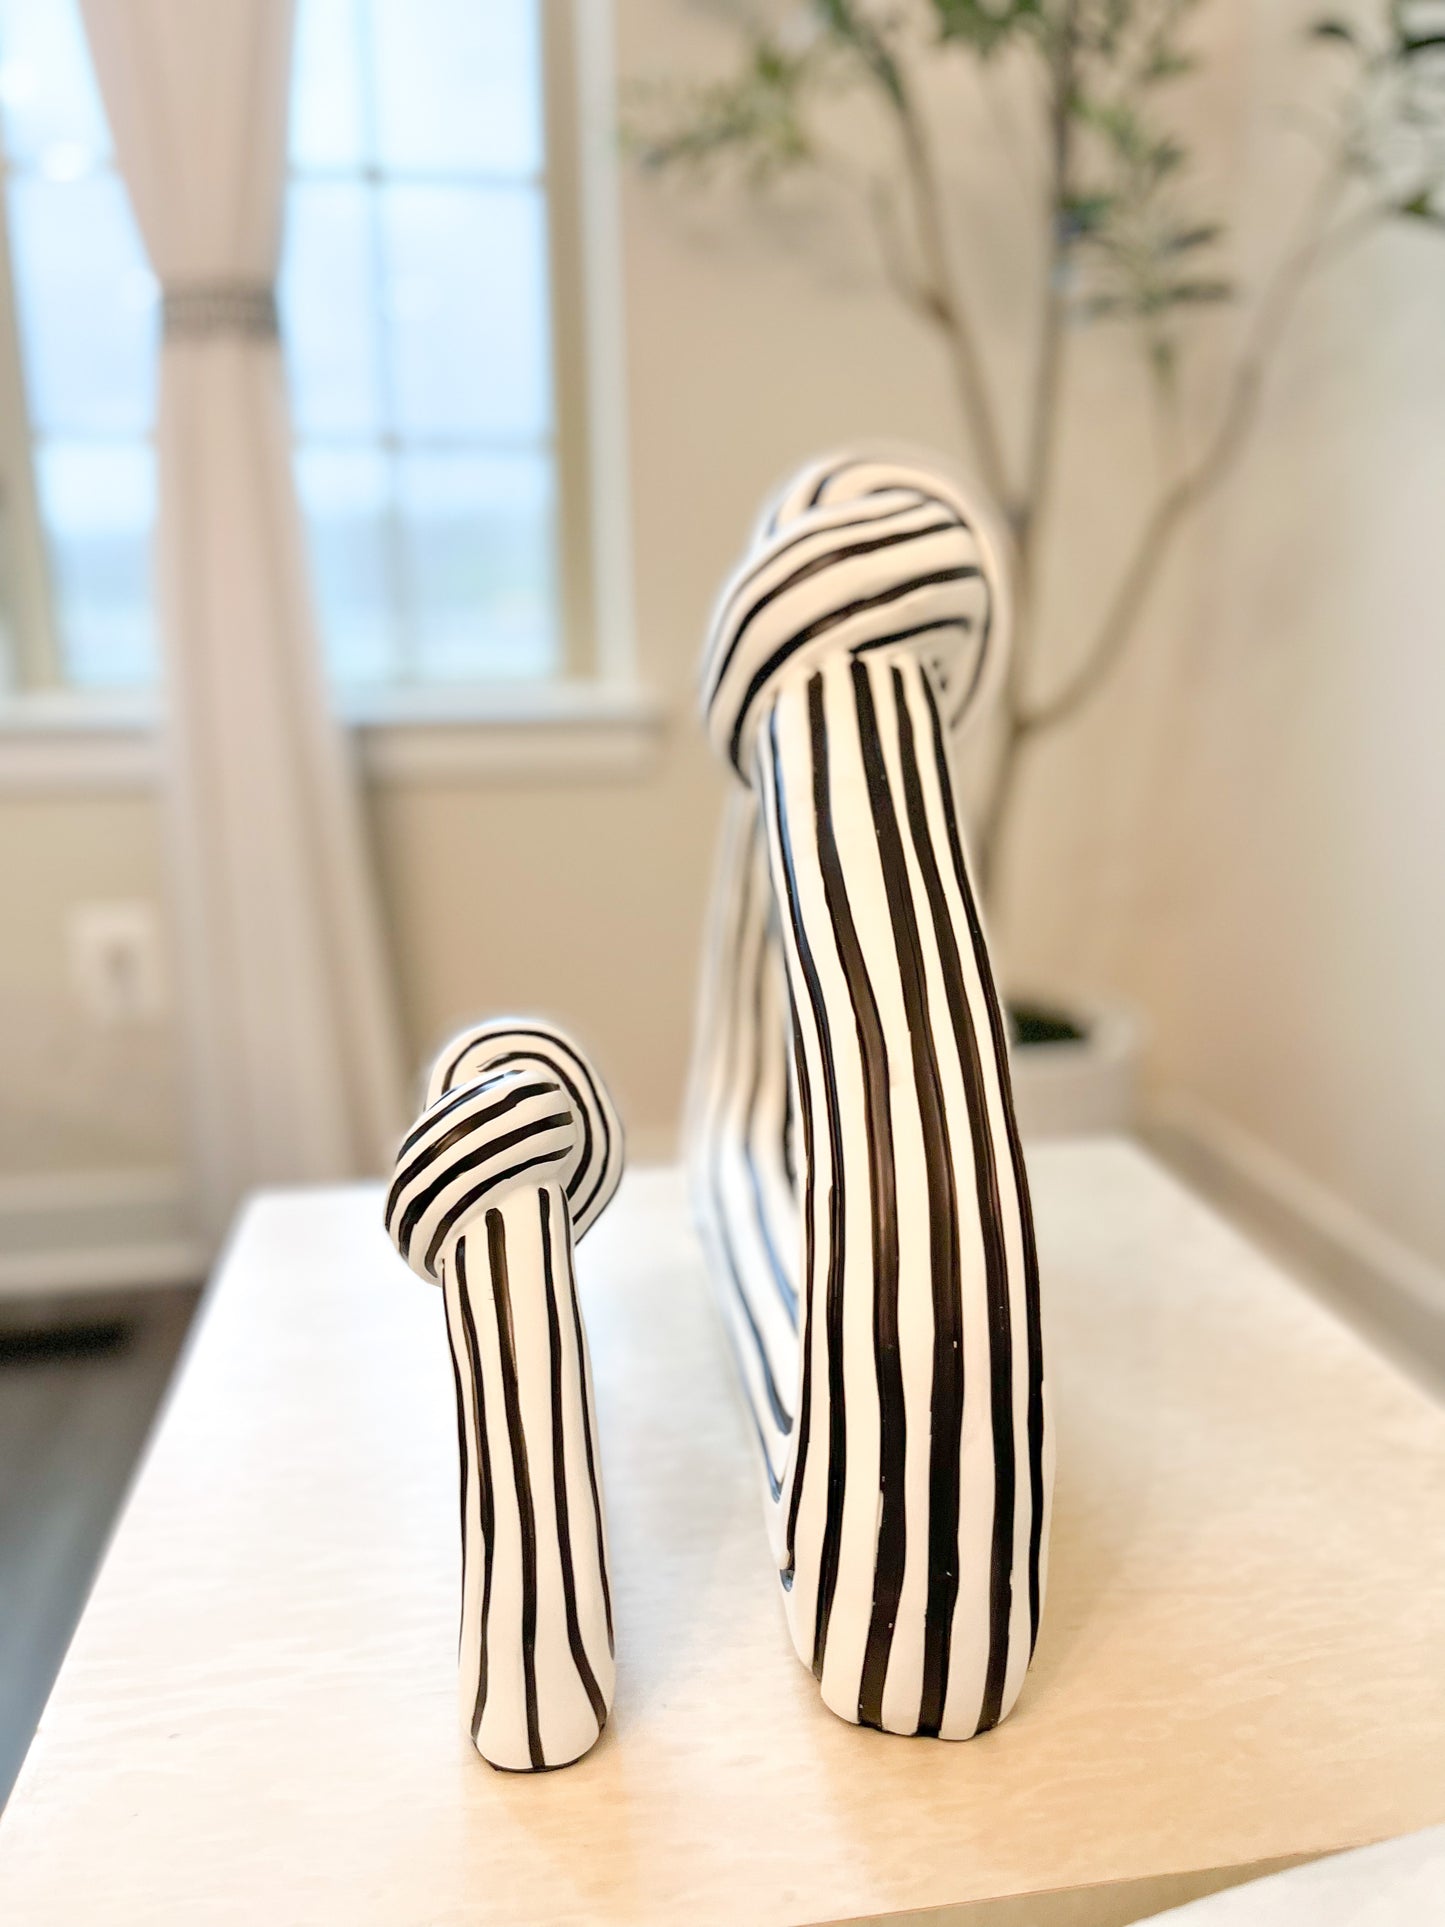 White and Black Knot Sculpture